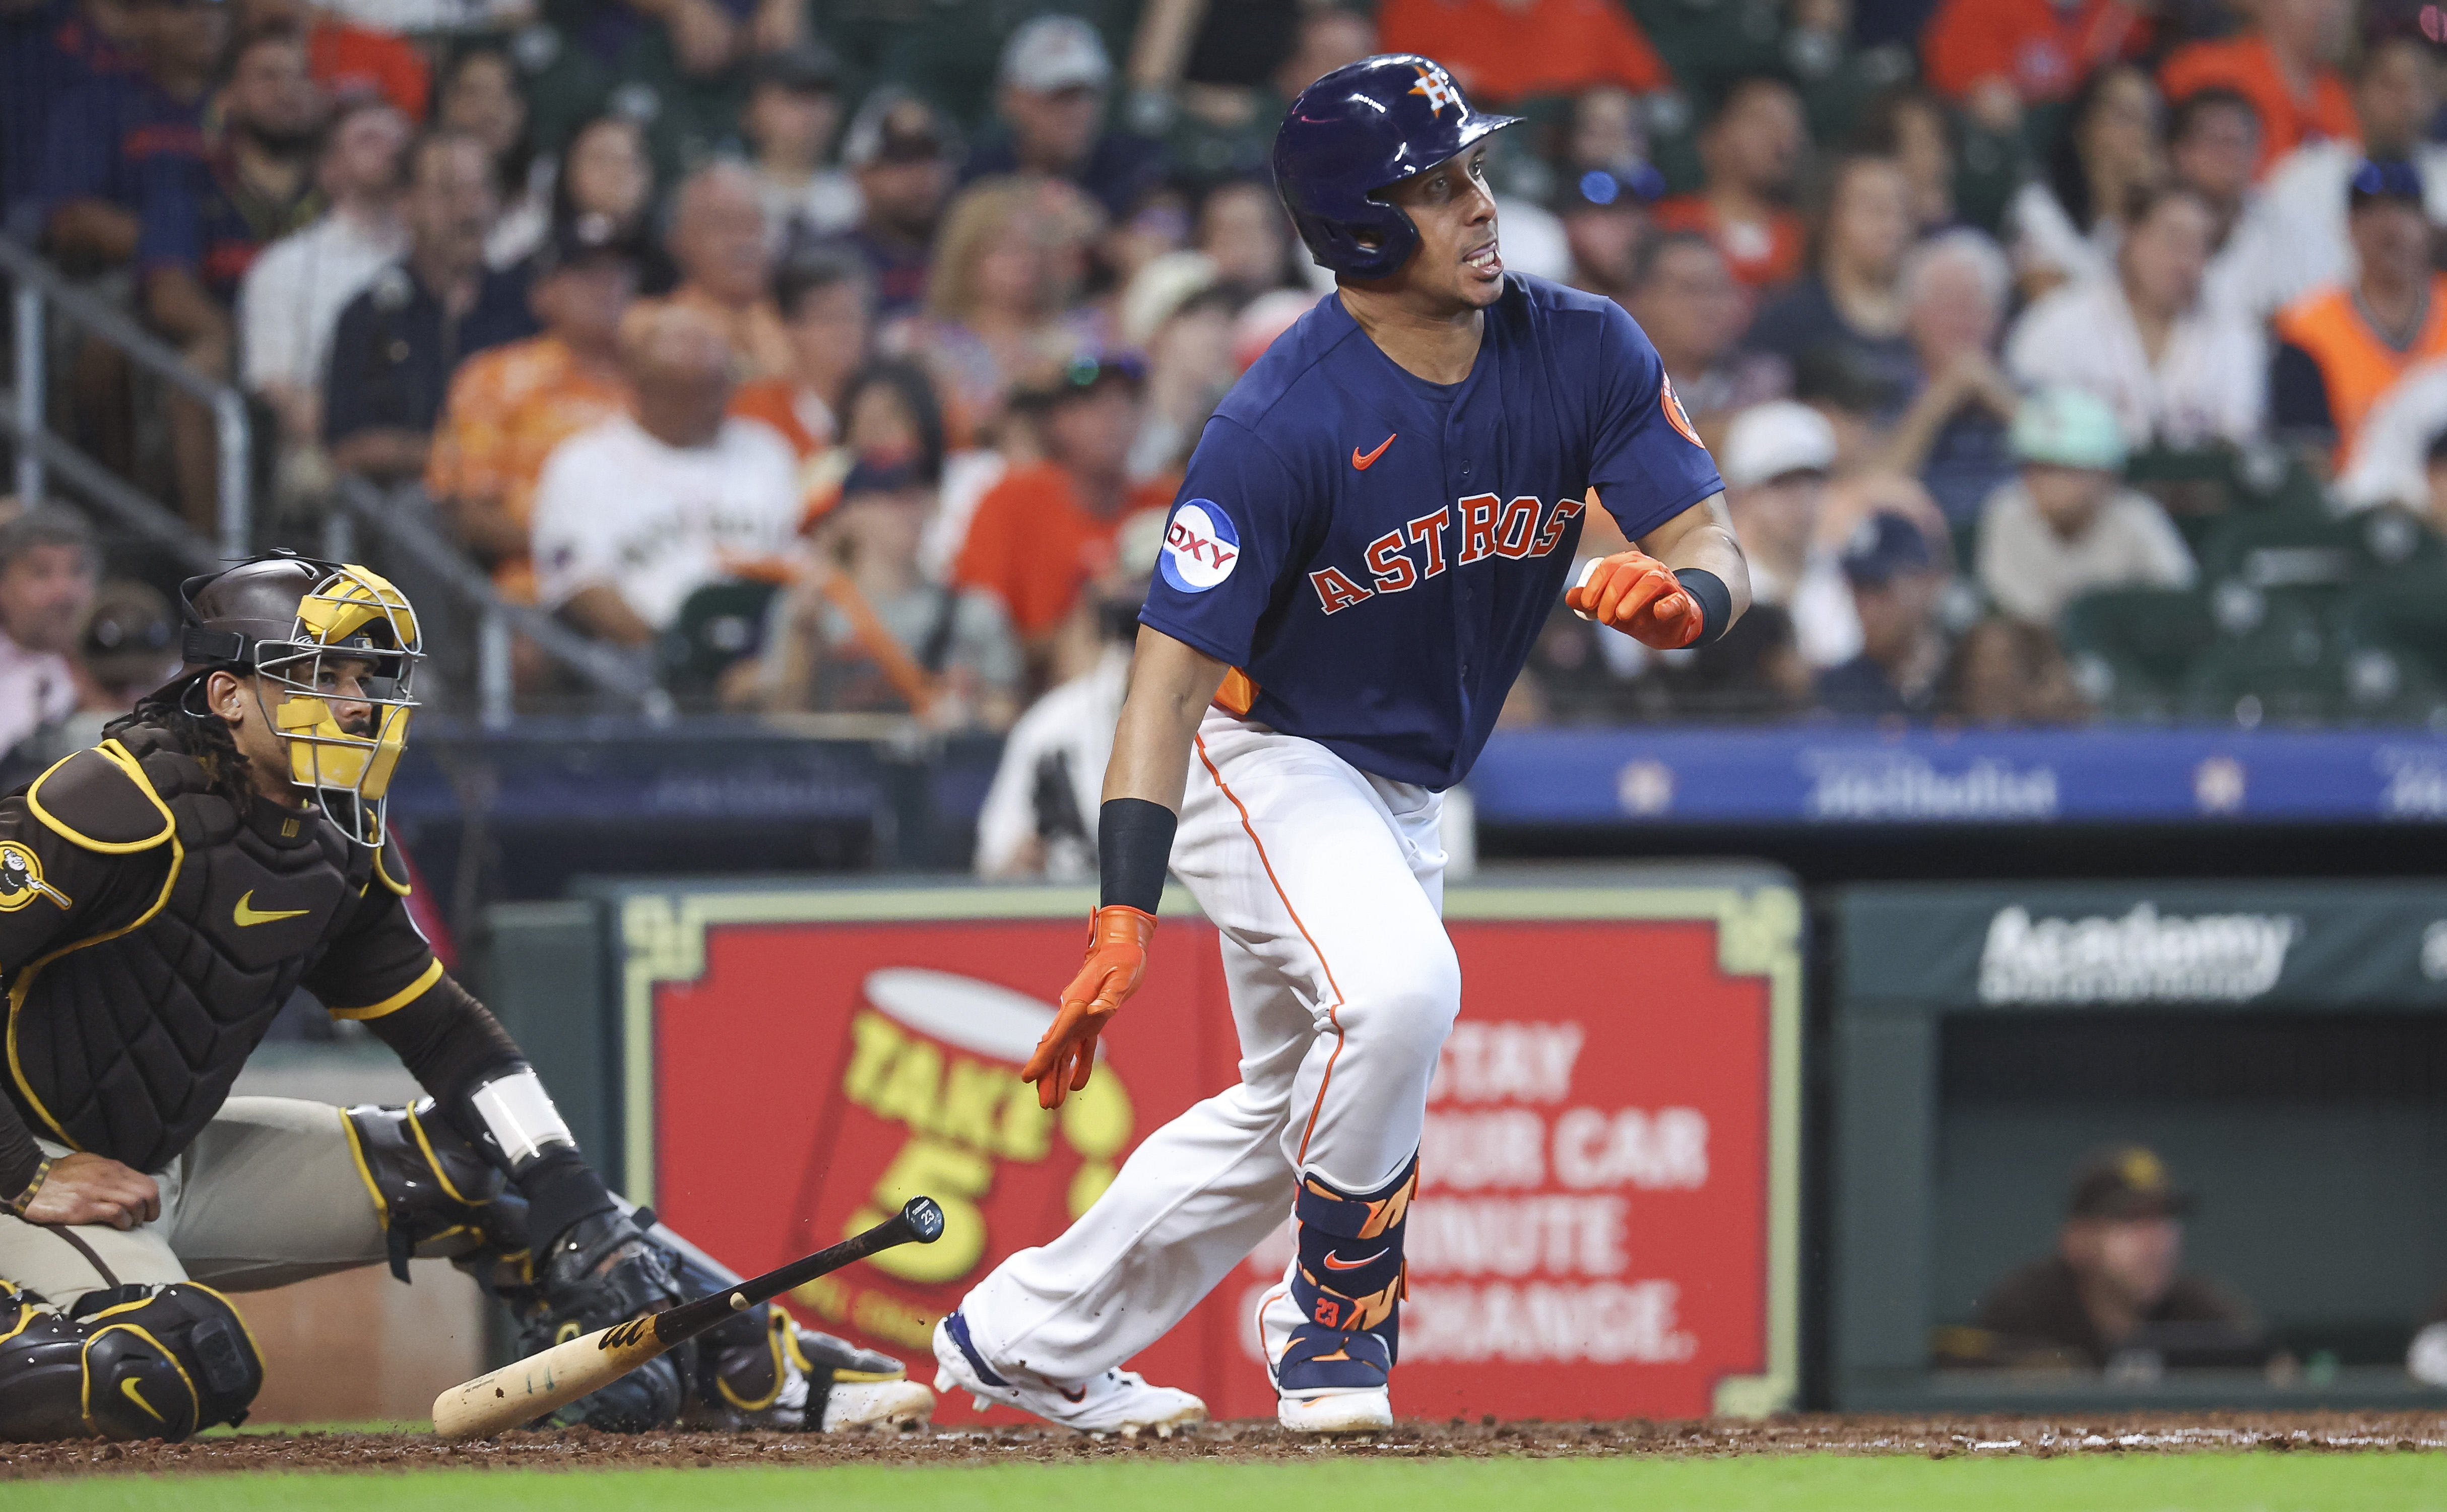 Injured Astros star Michael Brantley is happy to return to team: My family  has been embraced by Houston fans and this organization